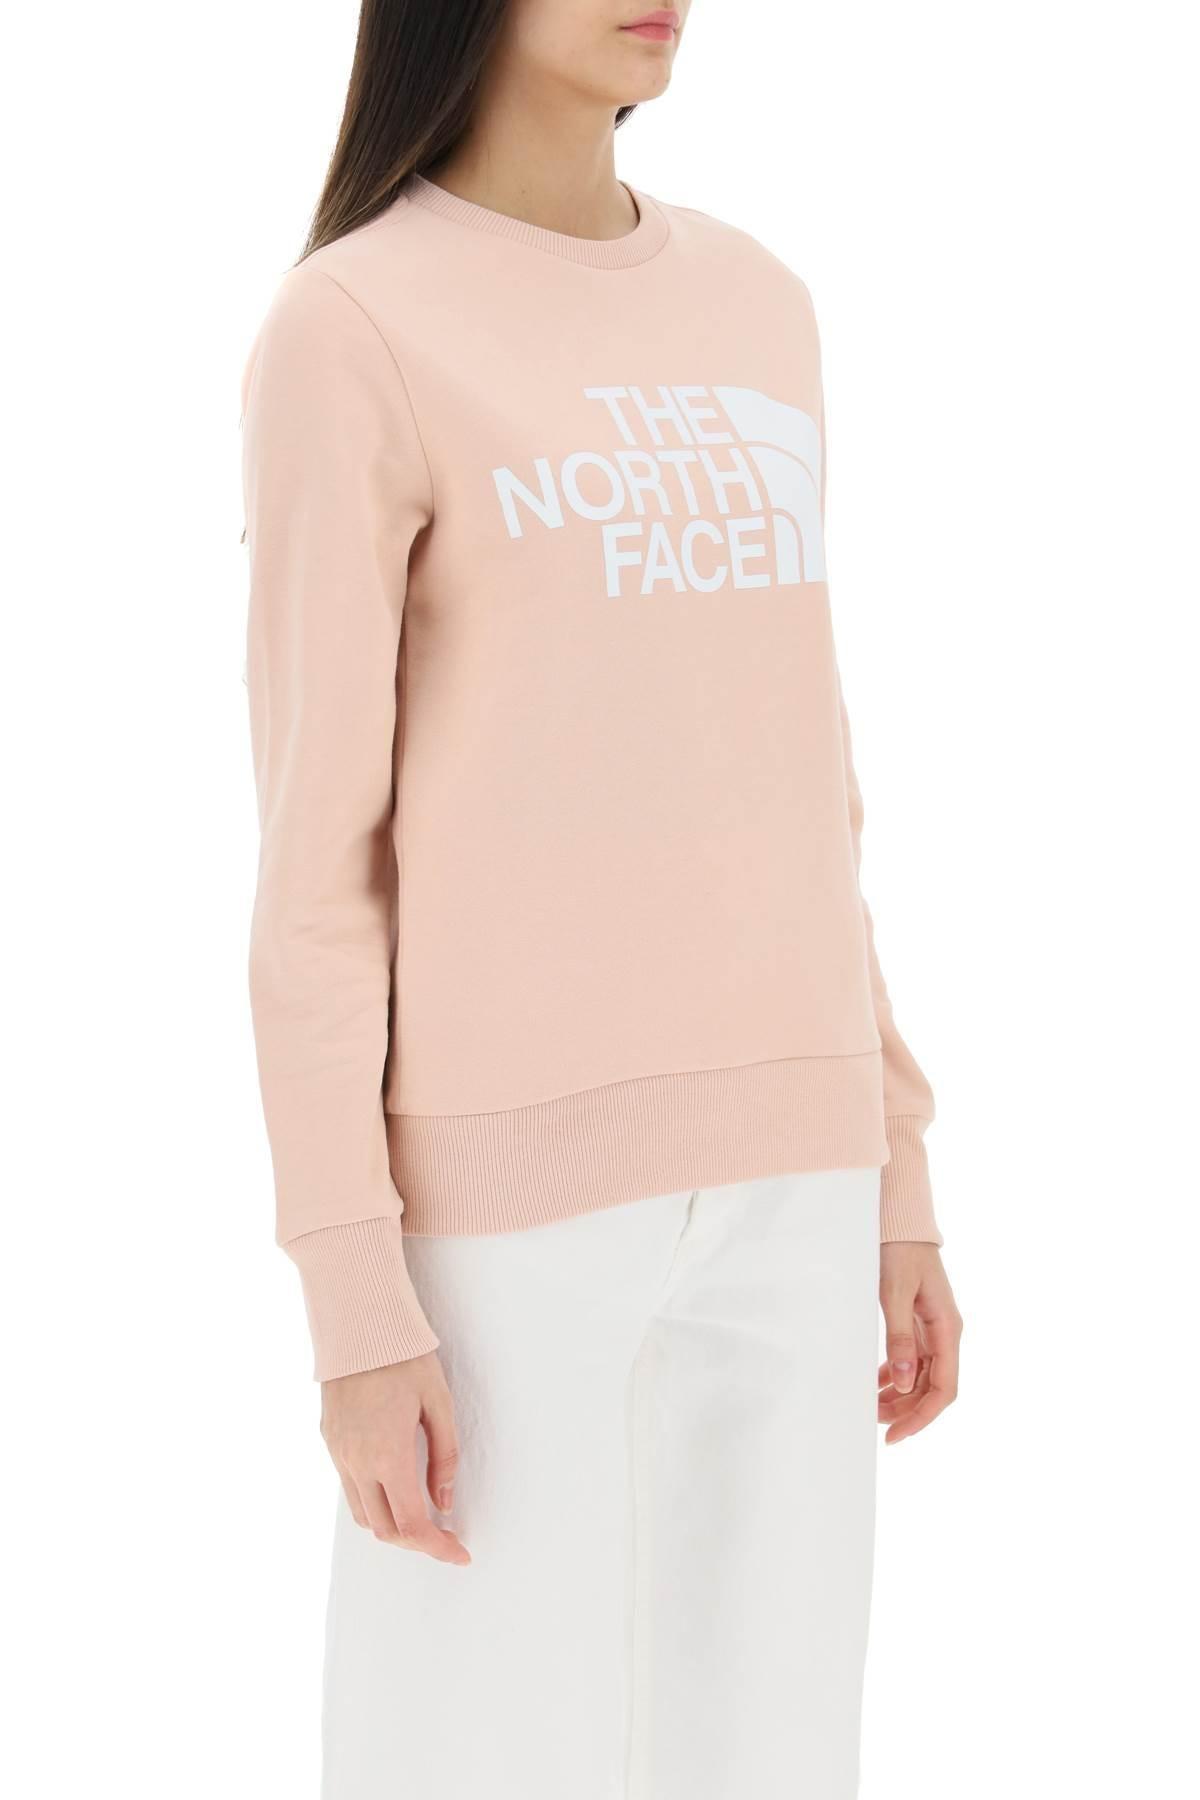 The North Face Logo Sweatshirt in Pink | Lyst